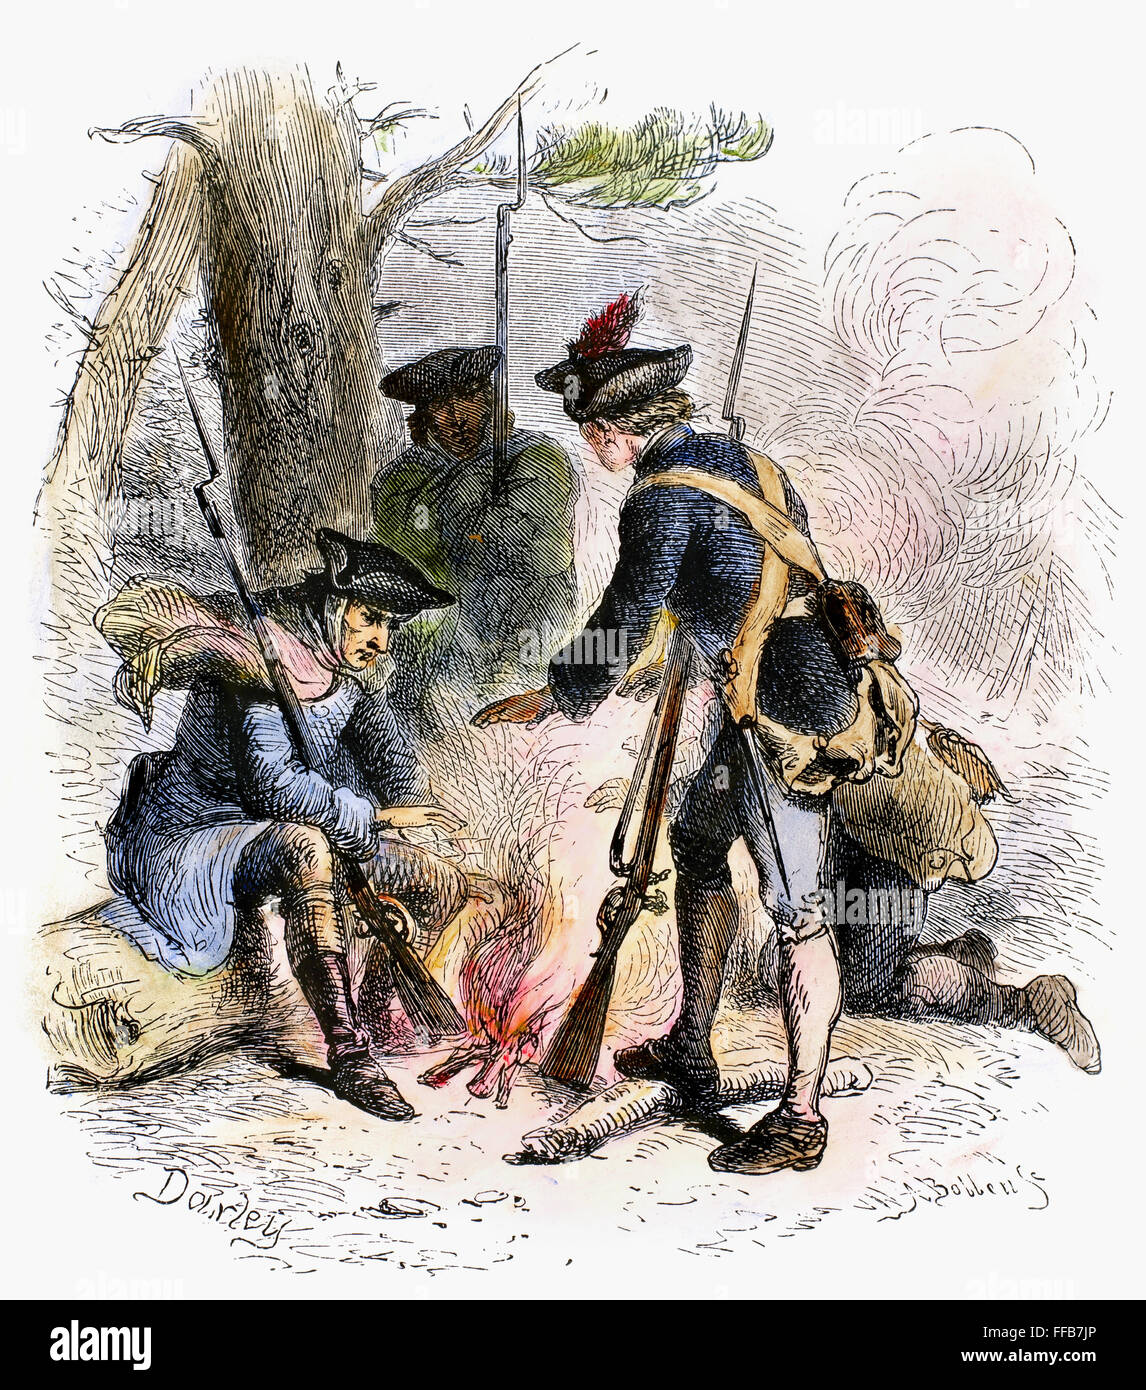 CONTINENTAL SOLDIERS. /nCold and weary soldiers of the Continental Army warming themselves around an open fire during the American Revolution. Wood engraving, 19th century, after Felix O.C. Darley. Stock Photo